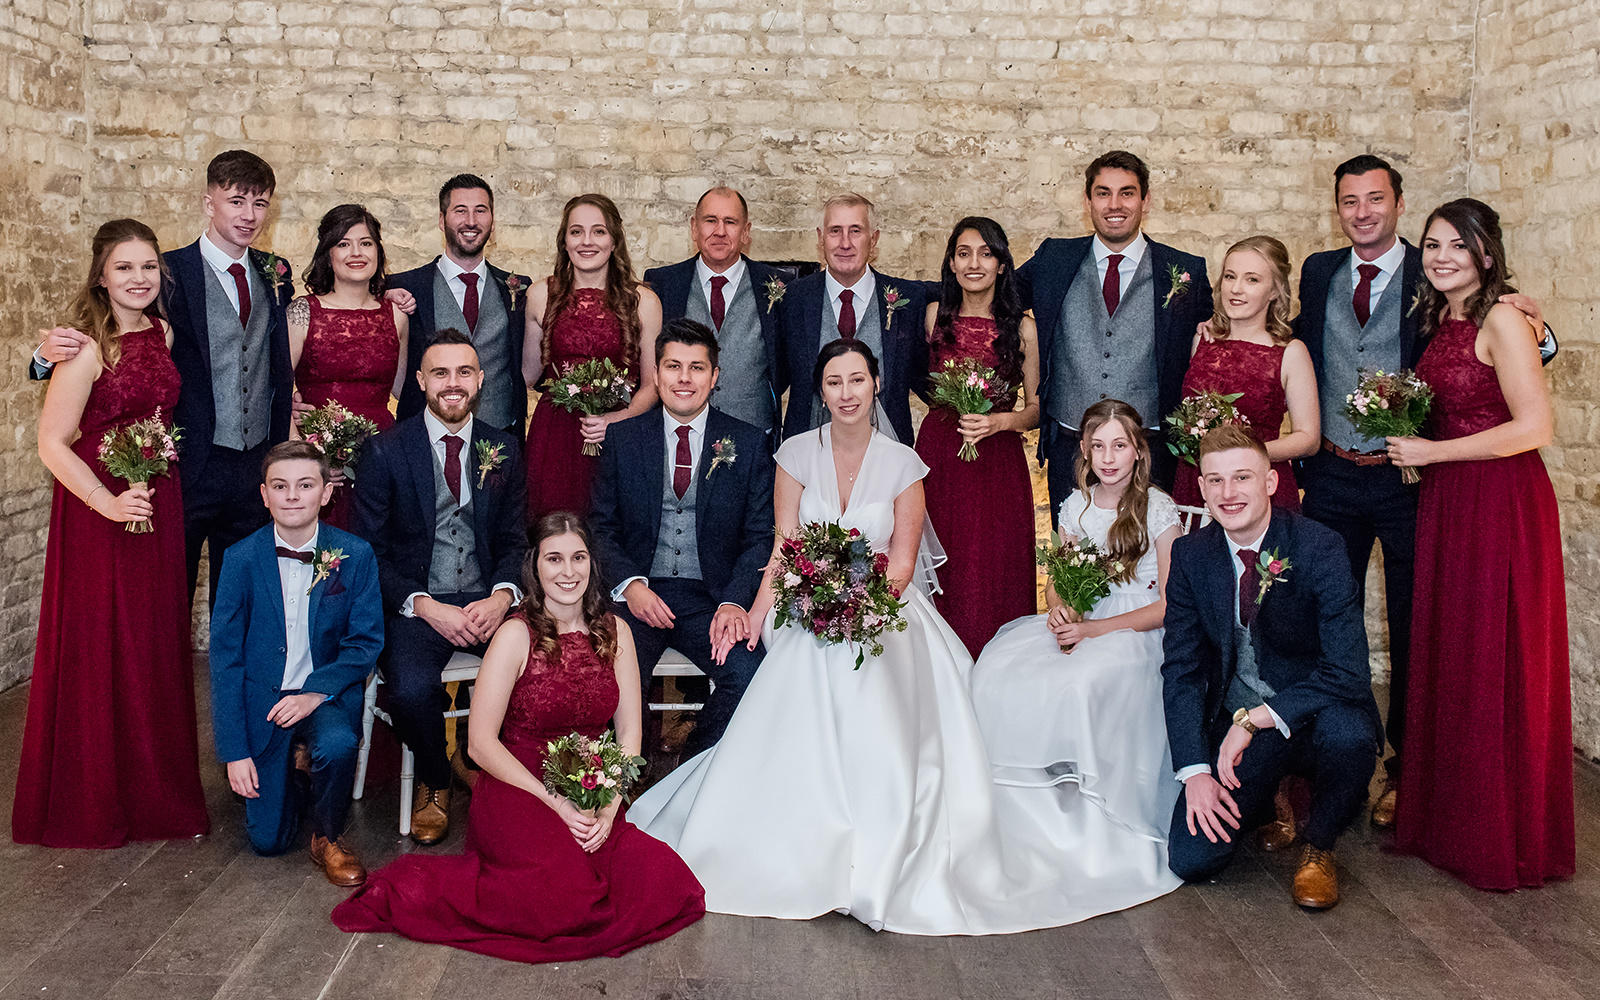 Capture Every Moment wedding photography duo from Cirencester reportage traditional photographers Lapstone Barn Chipping Campden Cotswolds venue Bride Groom Bridal Party Bridesmaids Groomsmen